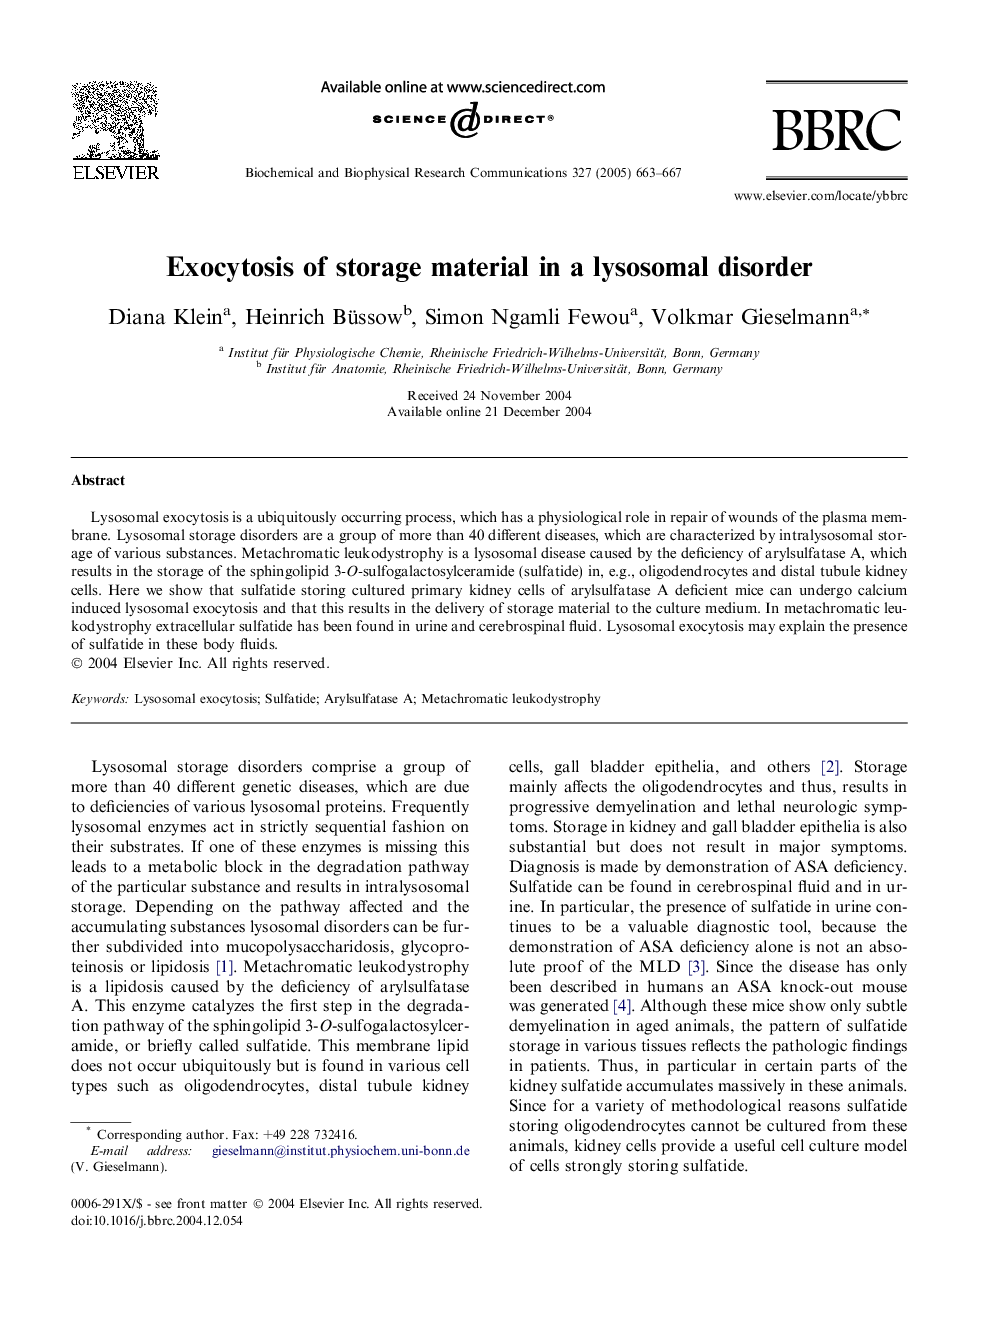 Exocytosis of storage material in a lysosomal disorder